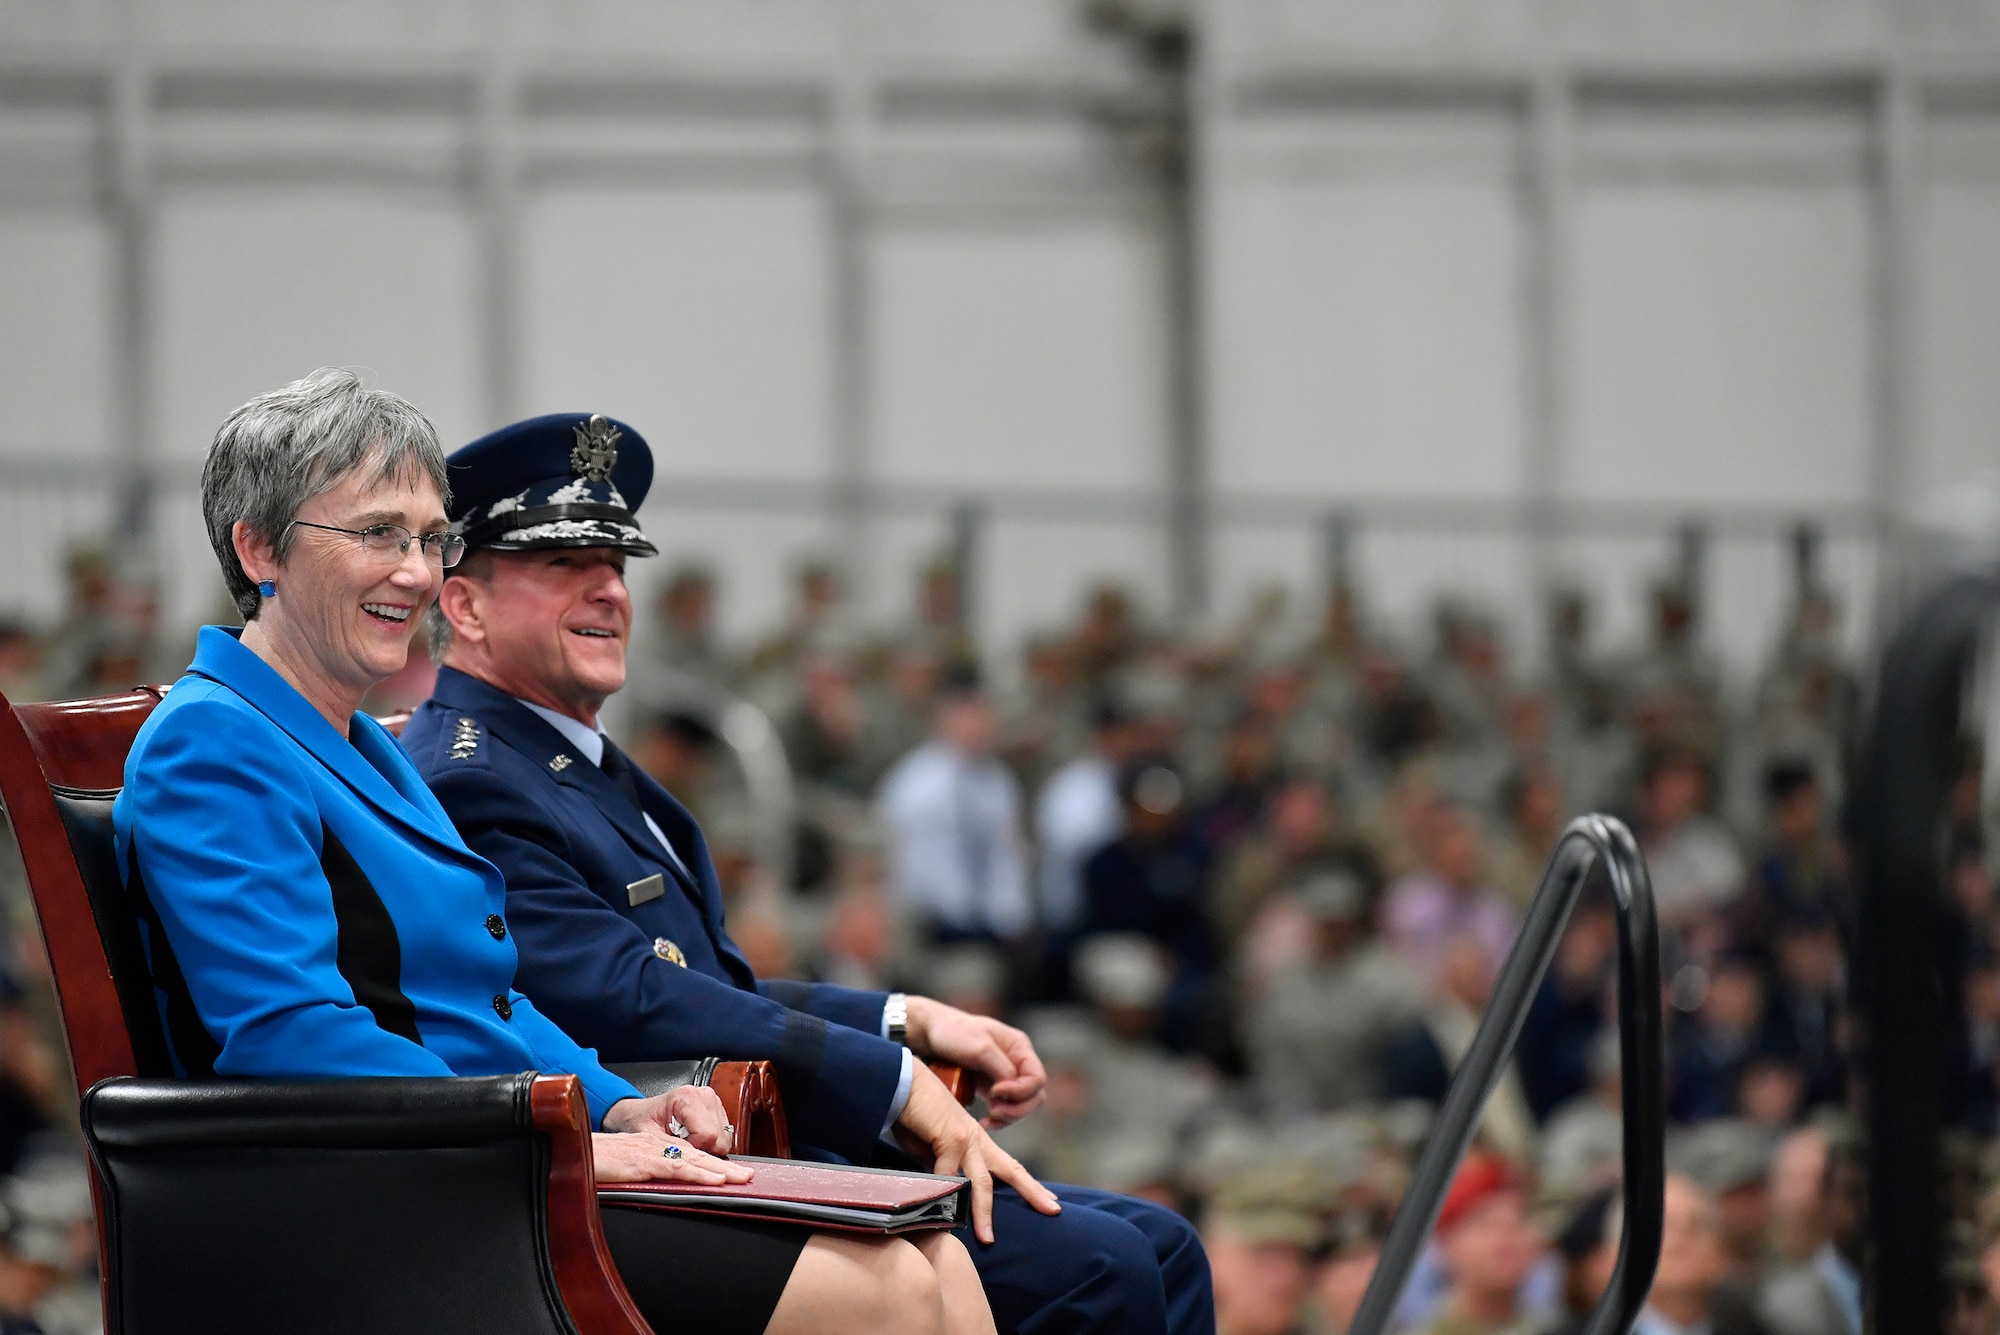 Secretary of the Air Force Heather Wilson and Air Force Chief of Staff Gen. David L. Goldfein smile during the SECAF's farewell ceremony at Joint Base Andrews, Md., May 21, 2019. (U.S. Air Force photo by Wayne Clark)